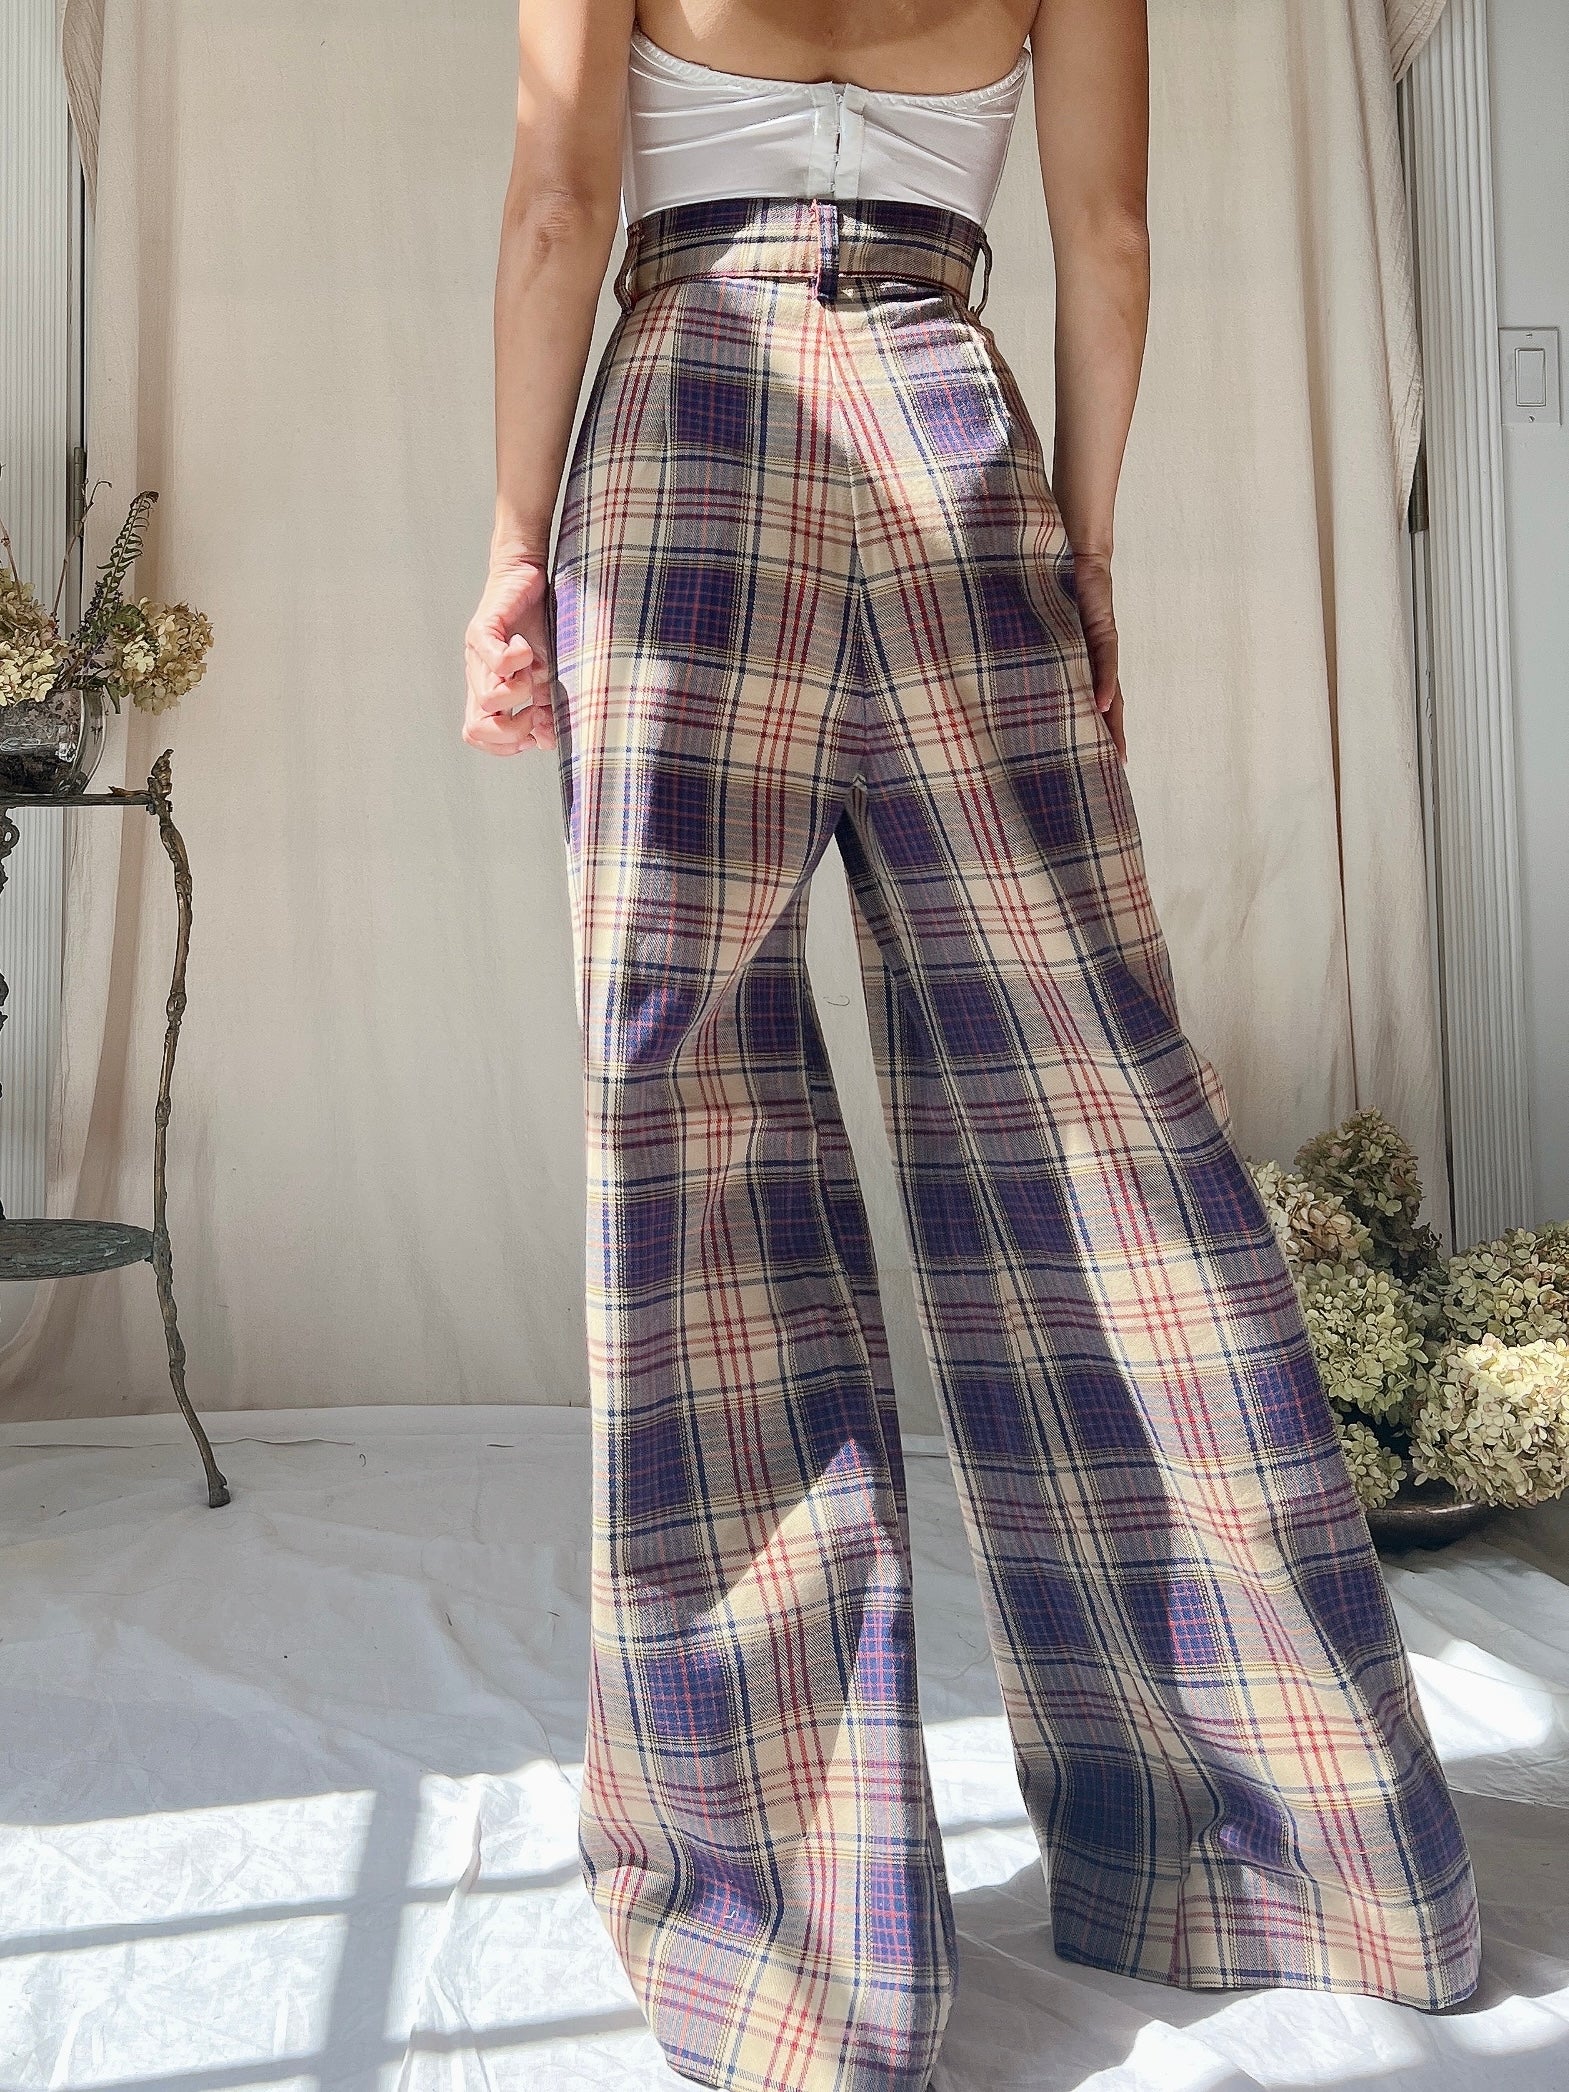 1970s Plaid High Waisted Trousers - M 30”